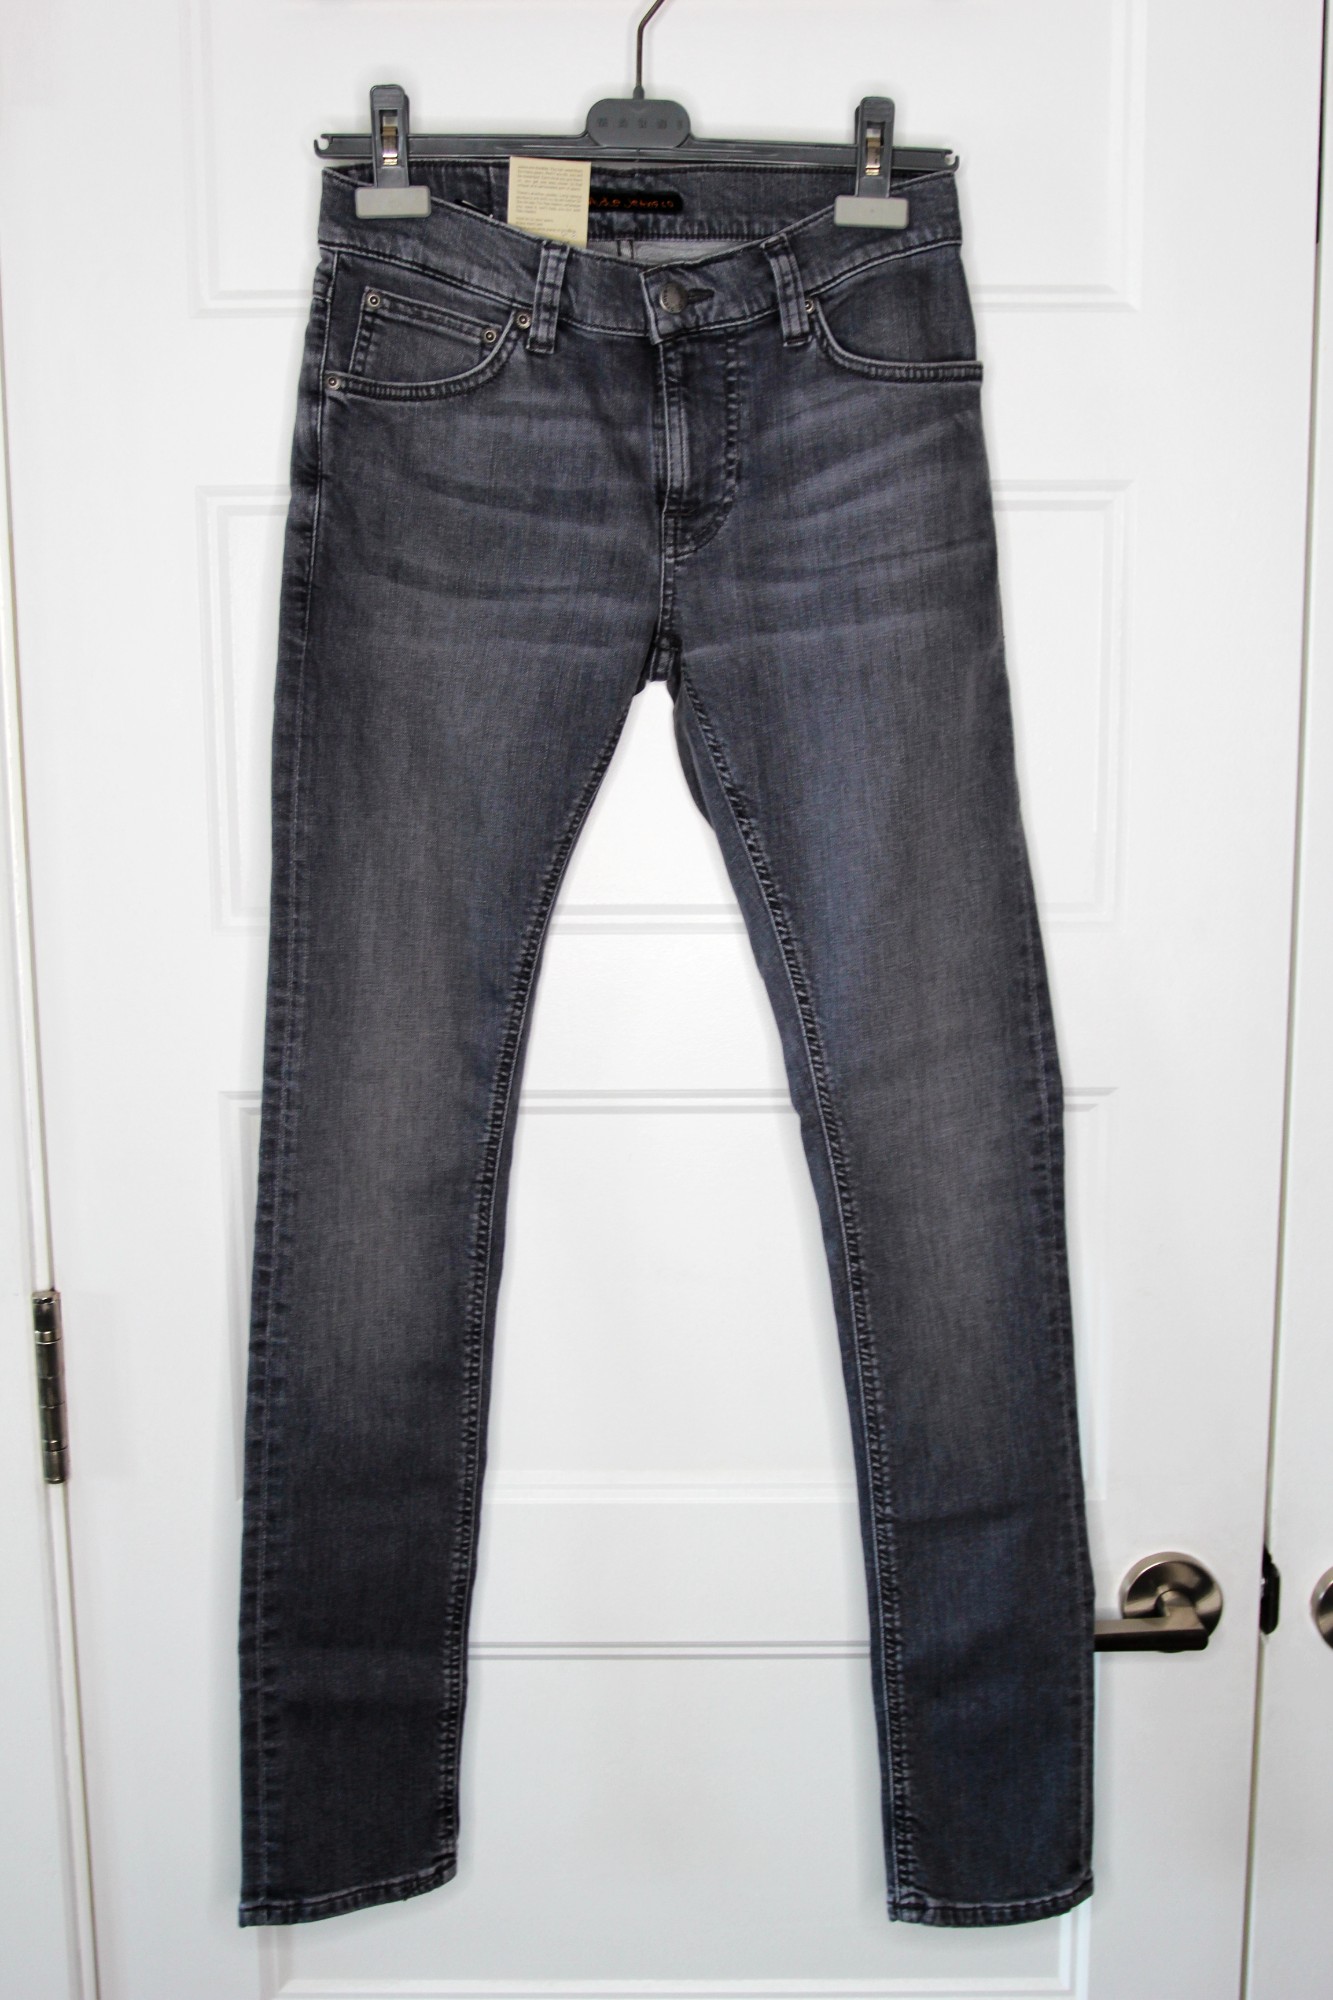 BNWT SS23 NUDIE JEANS TIGHT TERRY 28 x 32 - 2